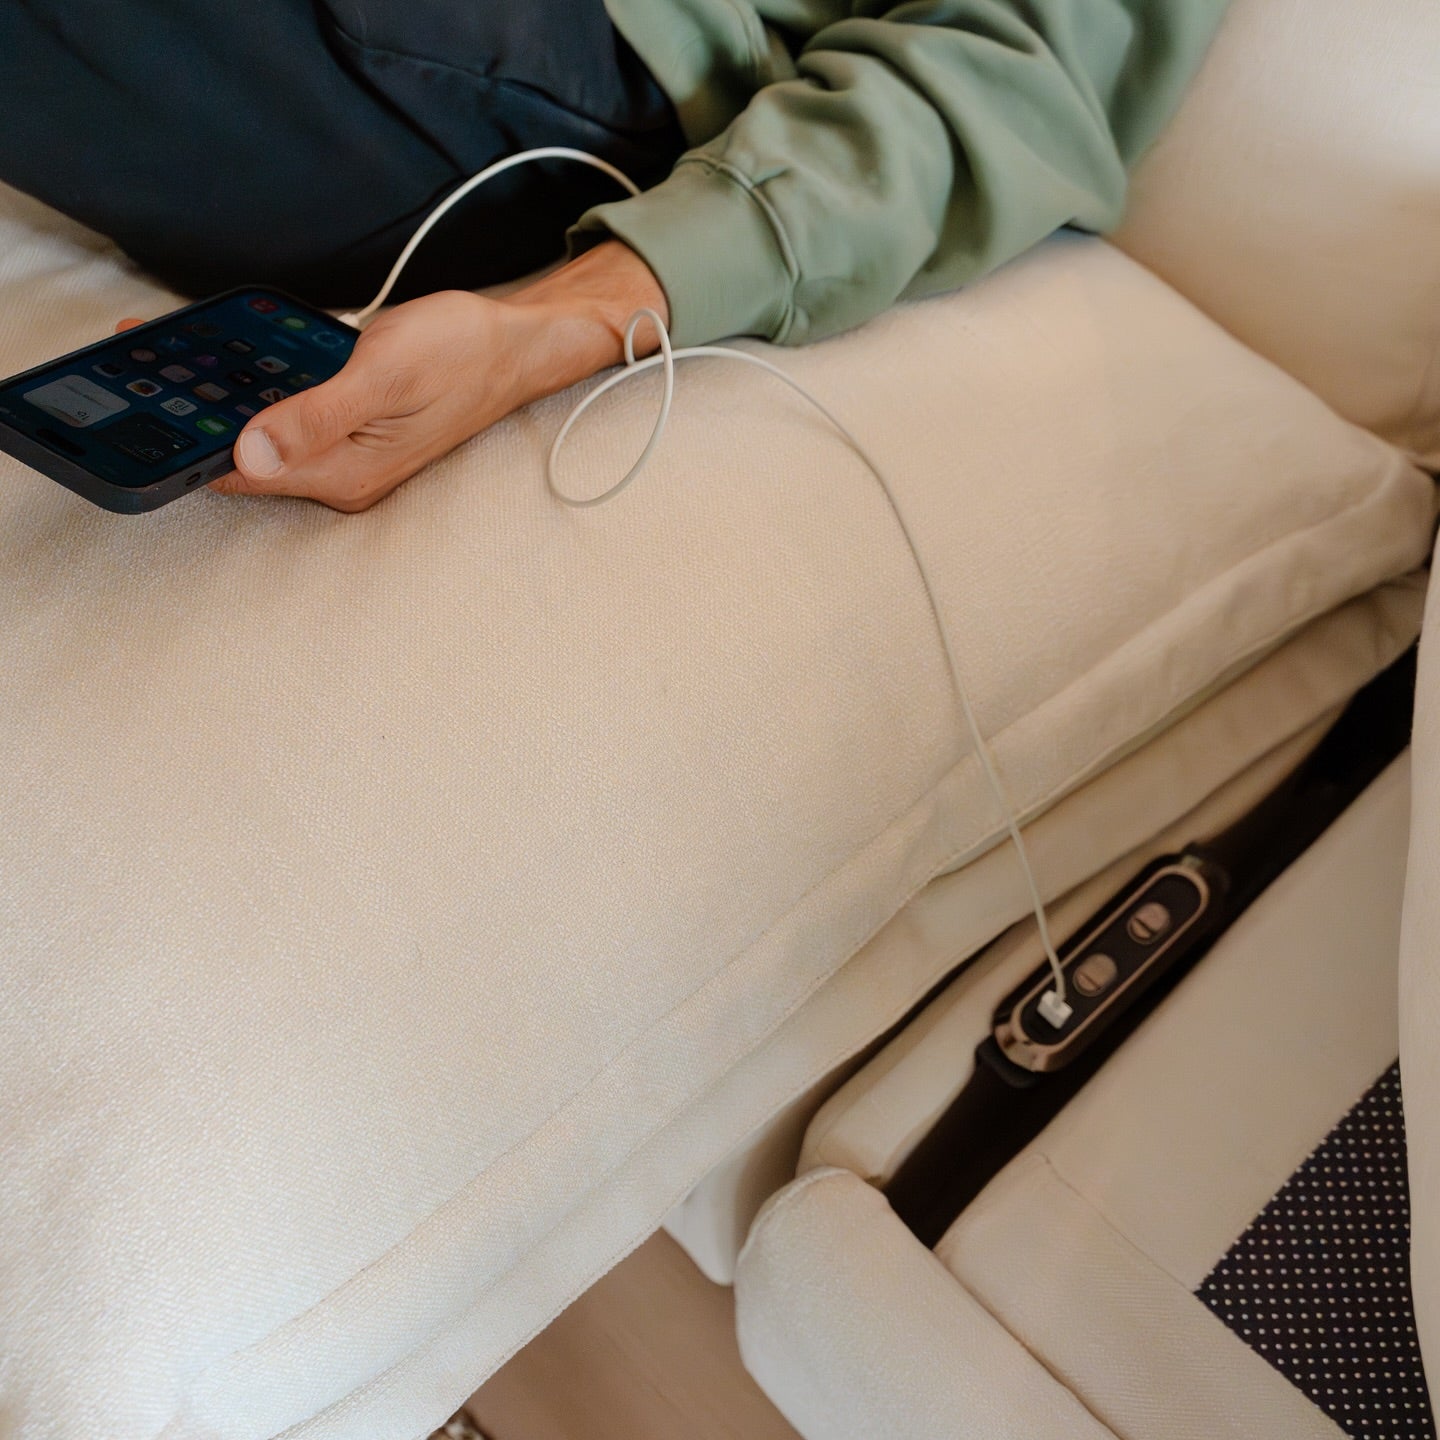 recliner come with added features like heating, massage options, and USB ports for charging devices